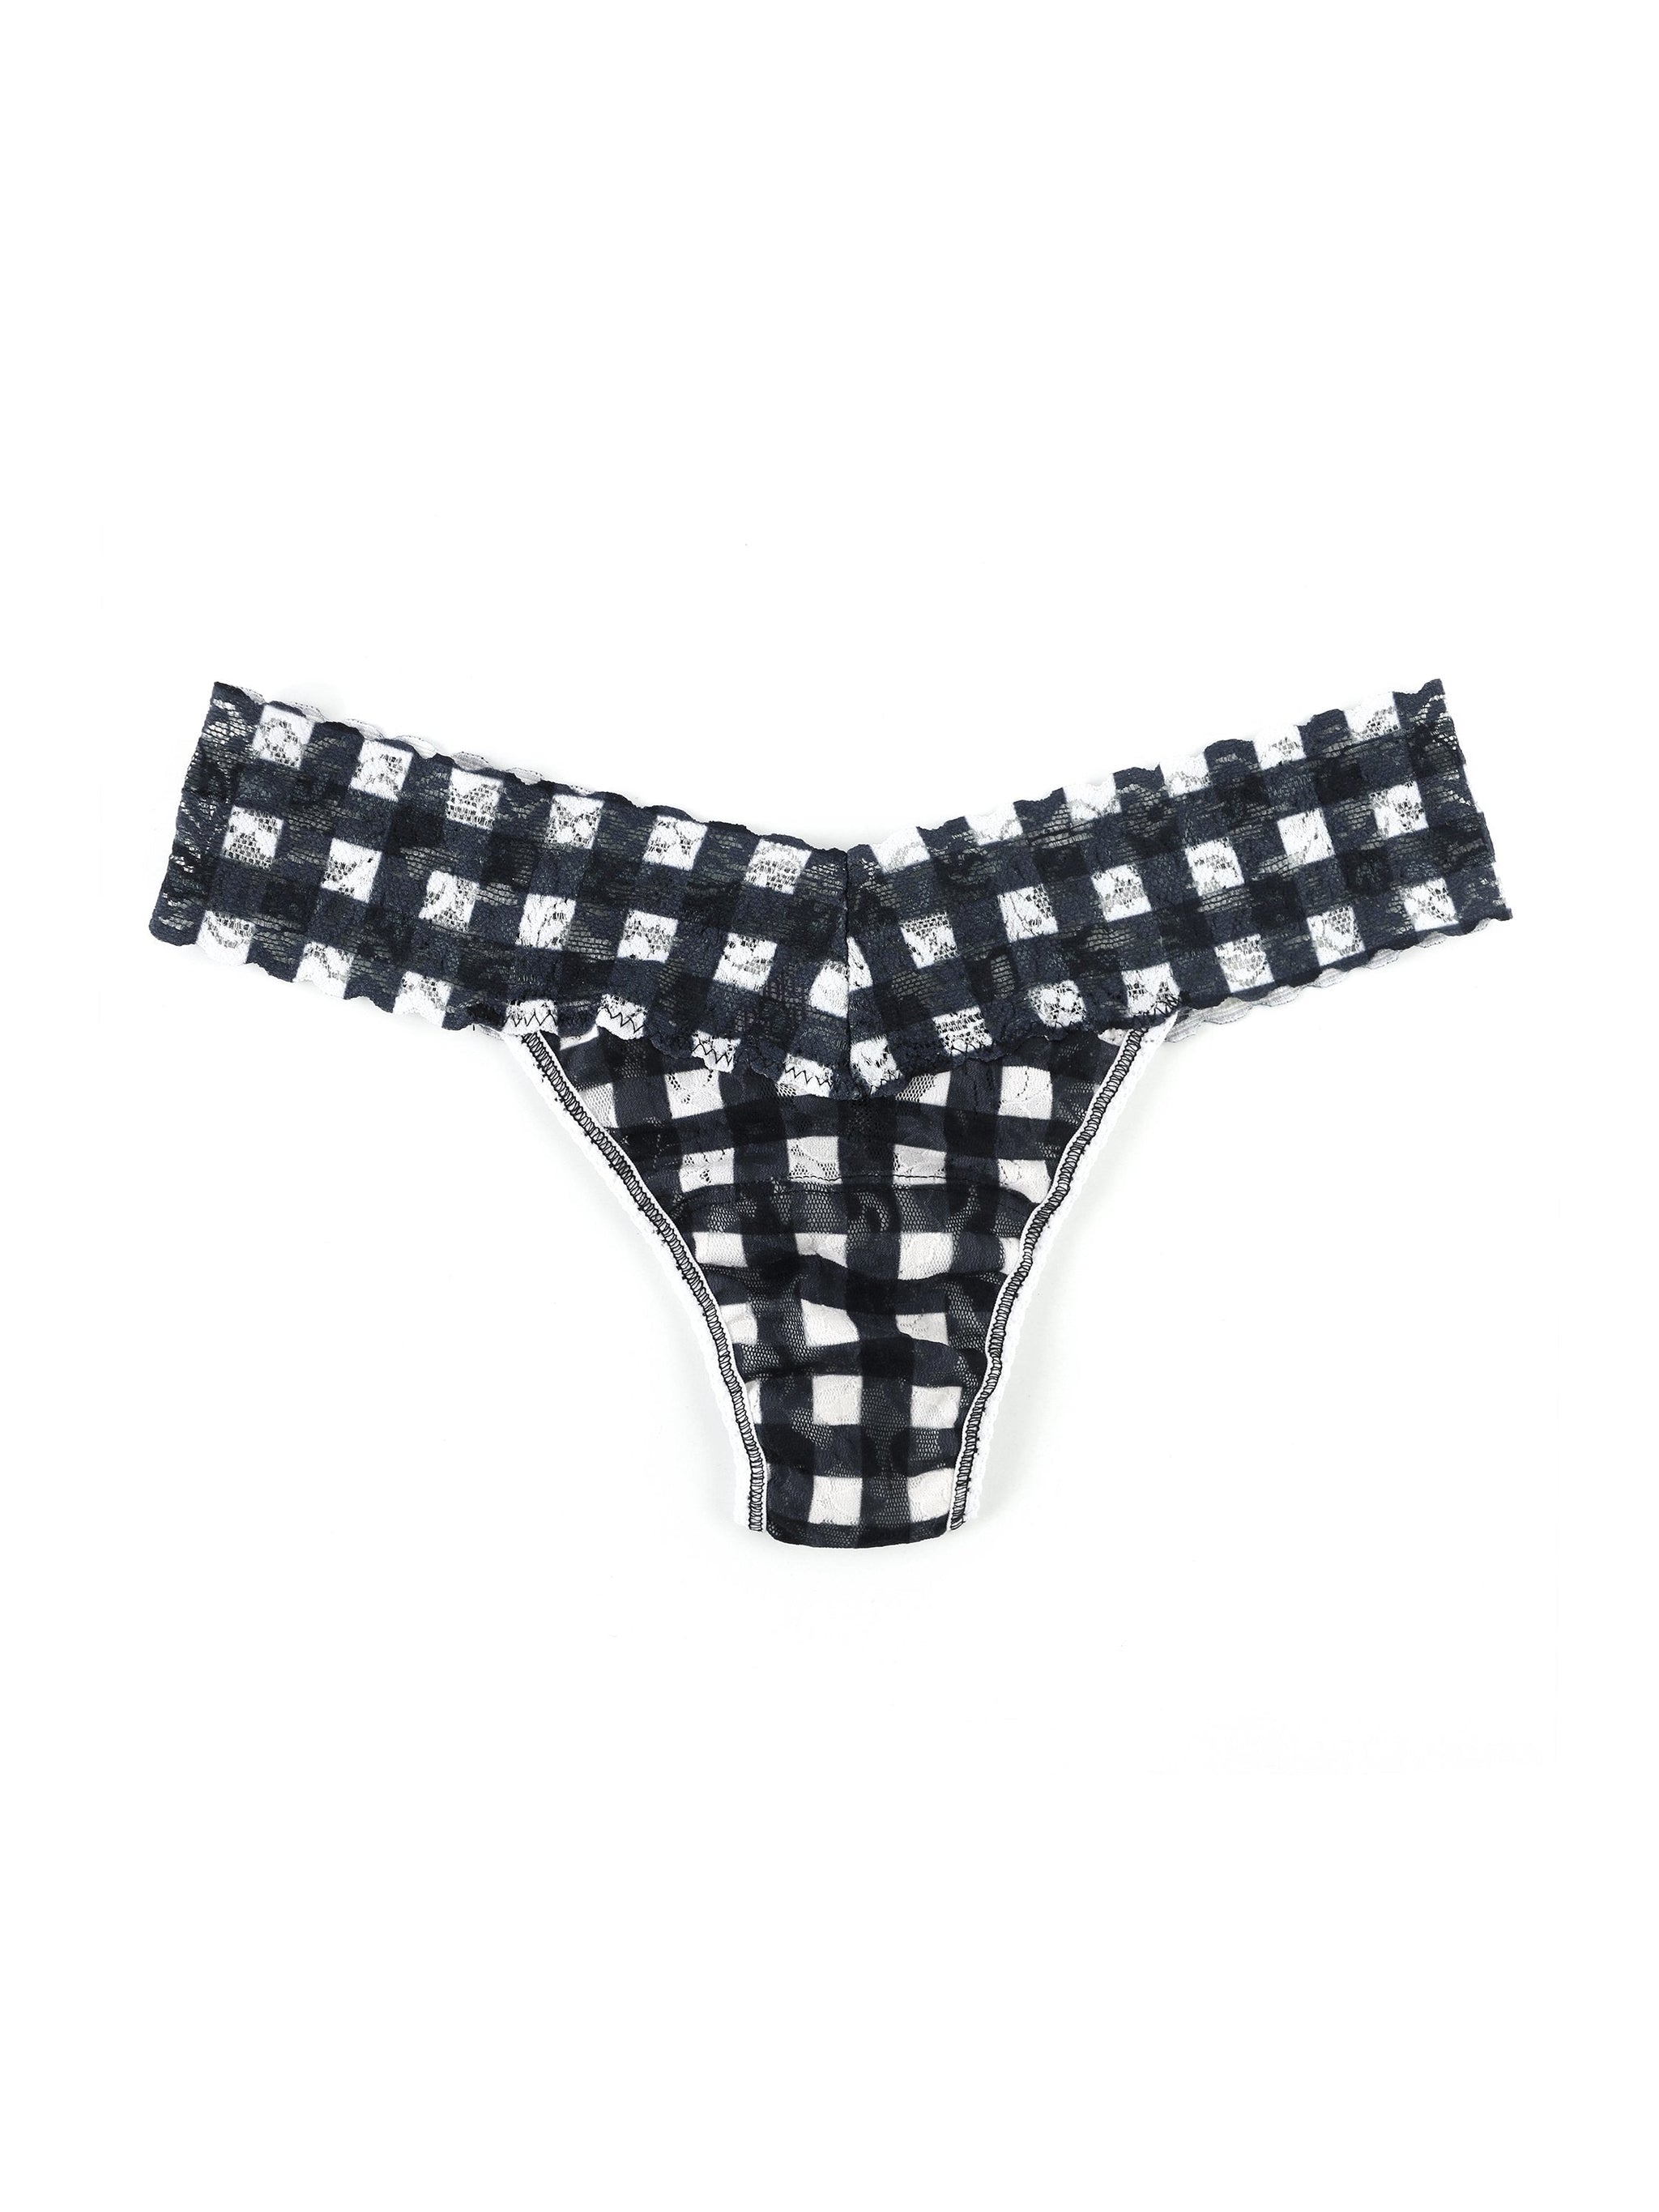 Petite Size Printed Signature Lace Thong Sale Gridlock